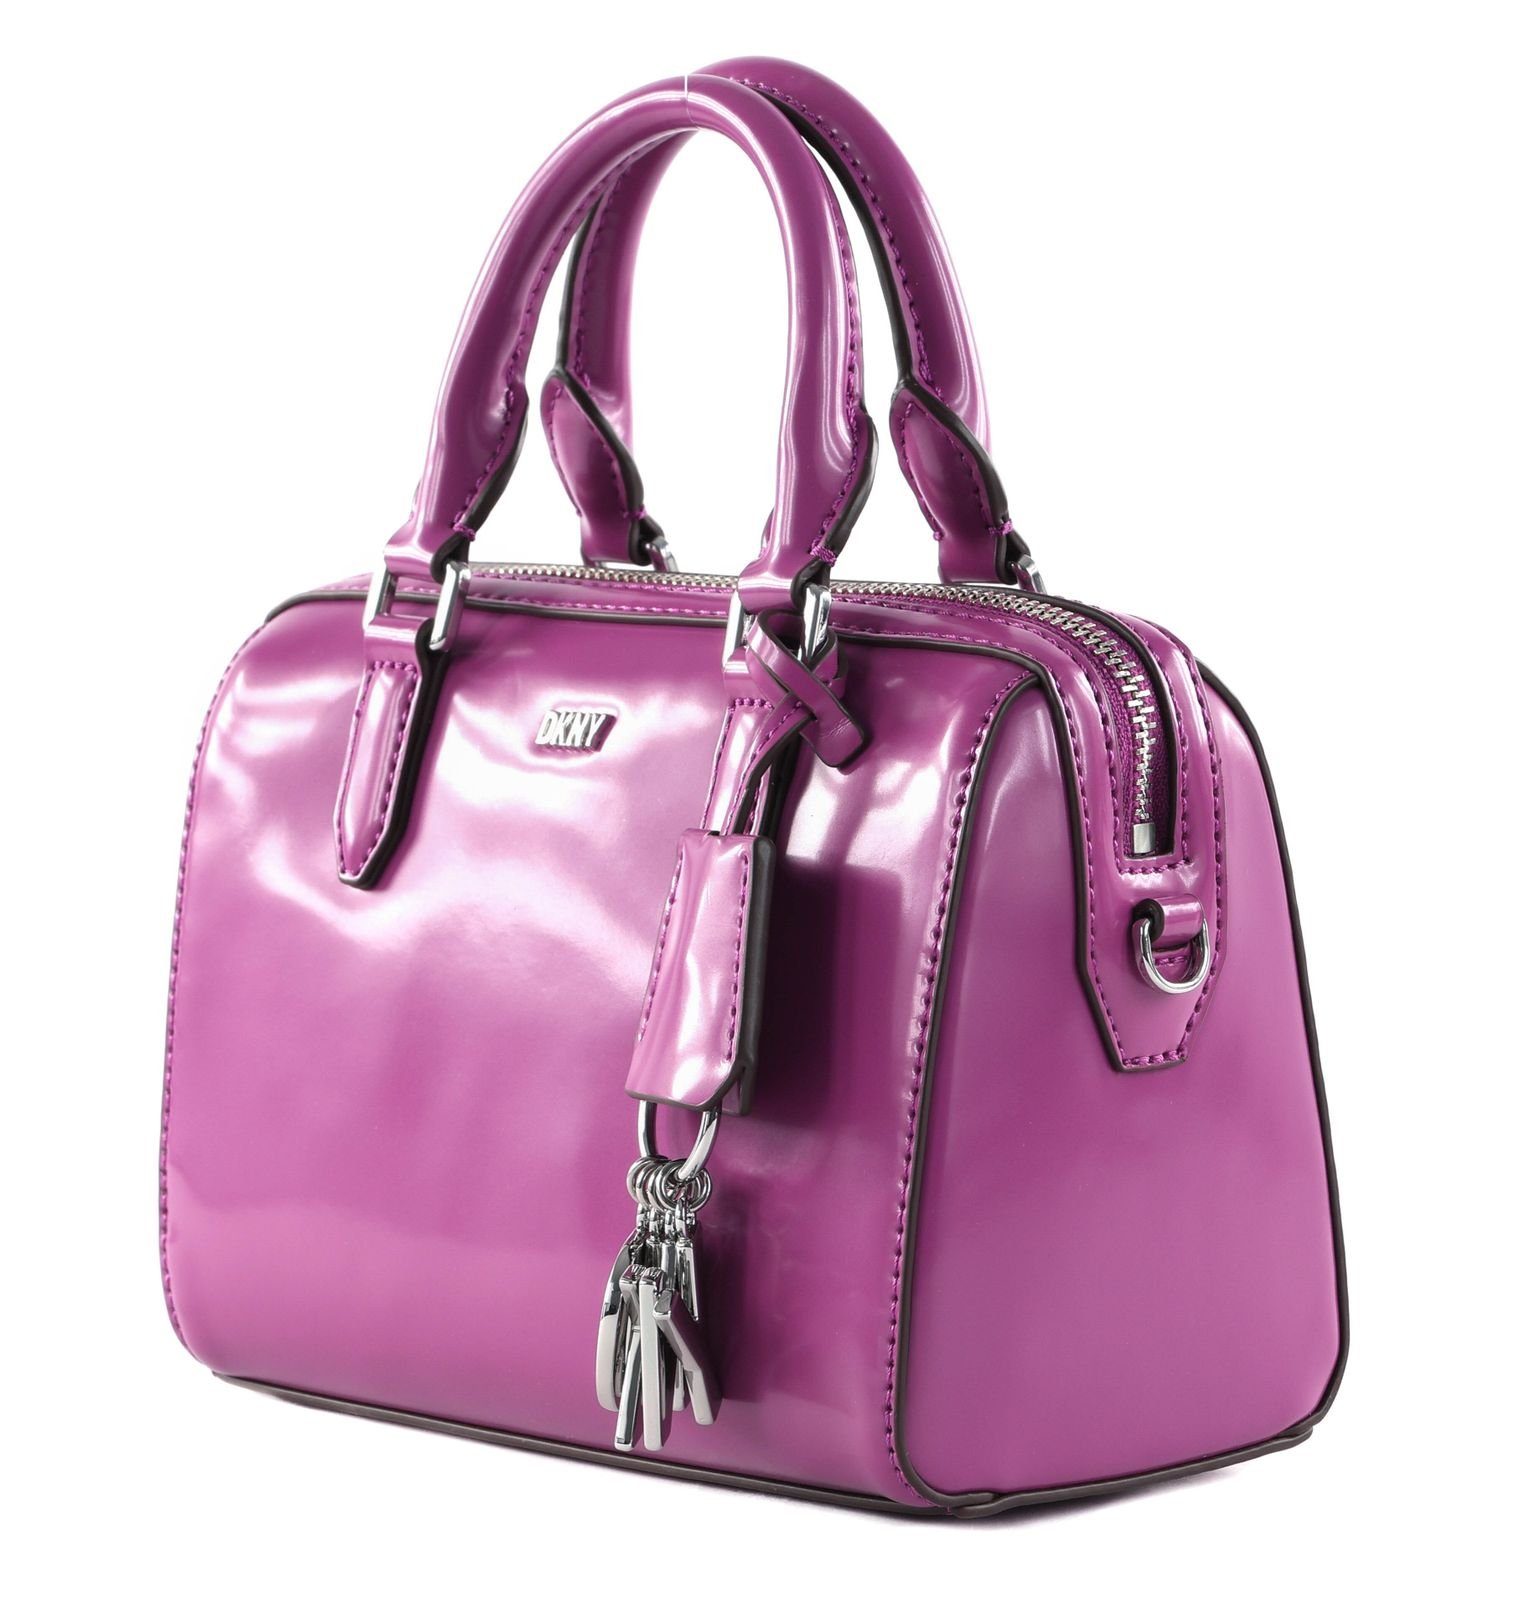 DK Paige DKNY Handtasche Orchid